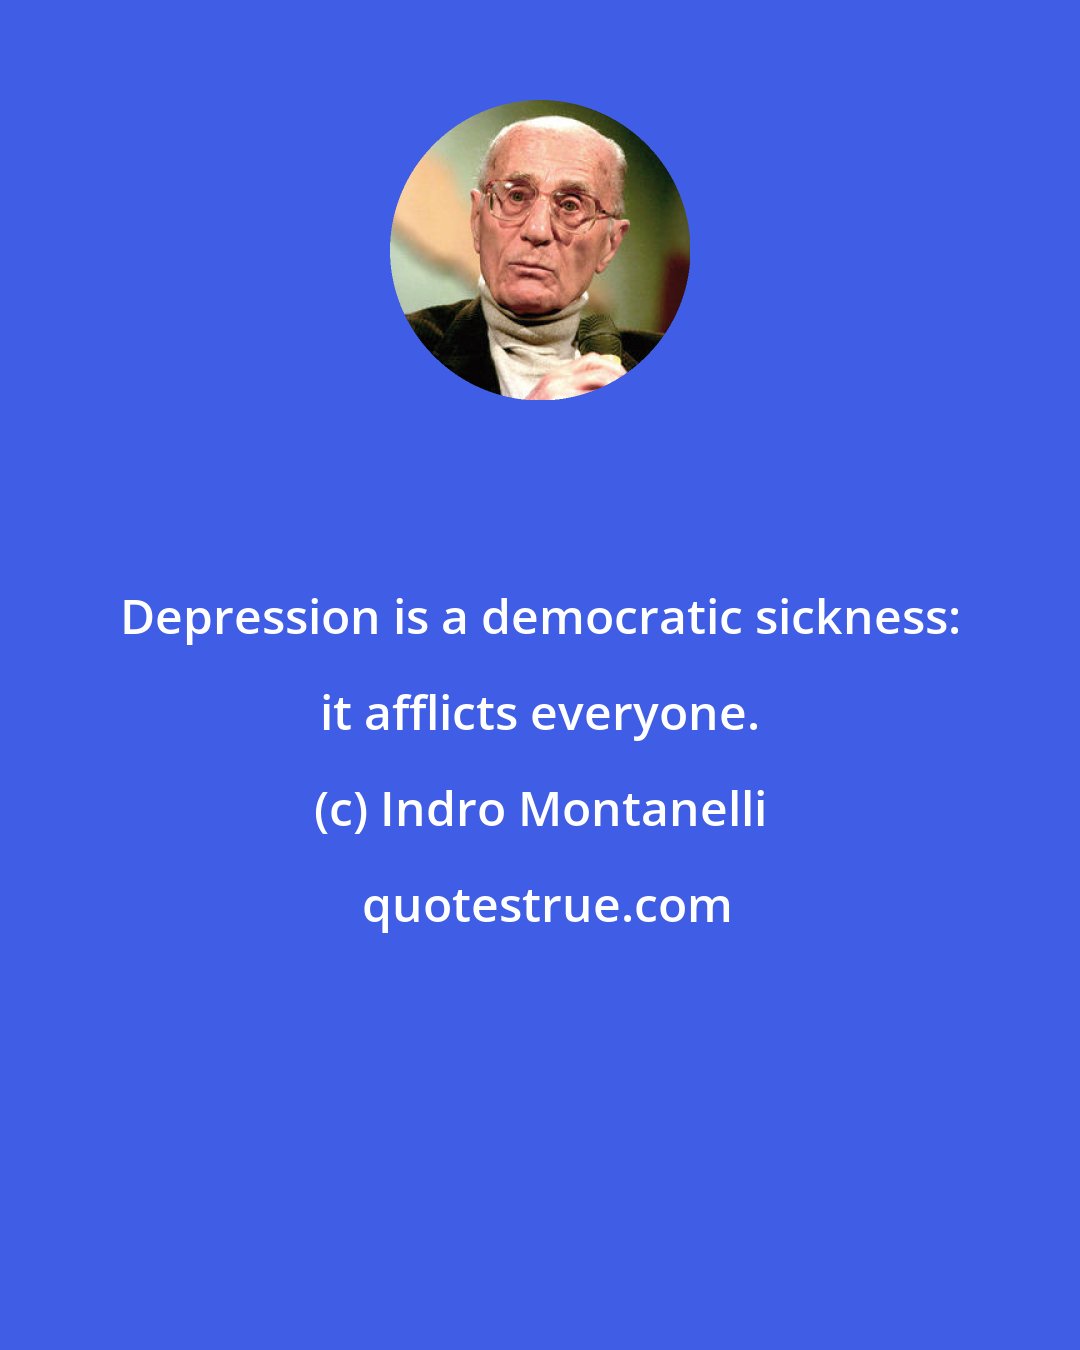 Indro Montanelli: Depression is a democratic sickness: it afflicts everyone.